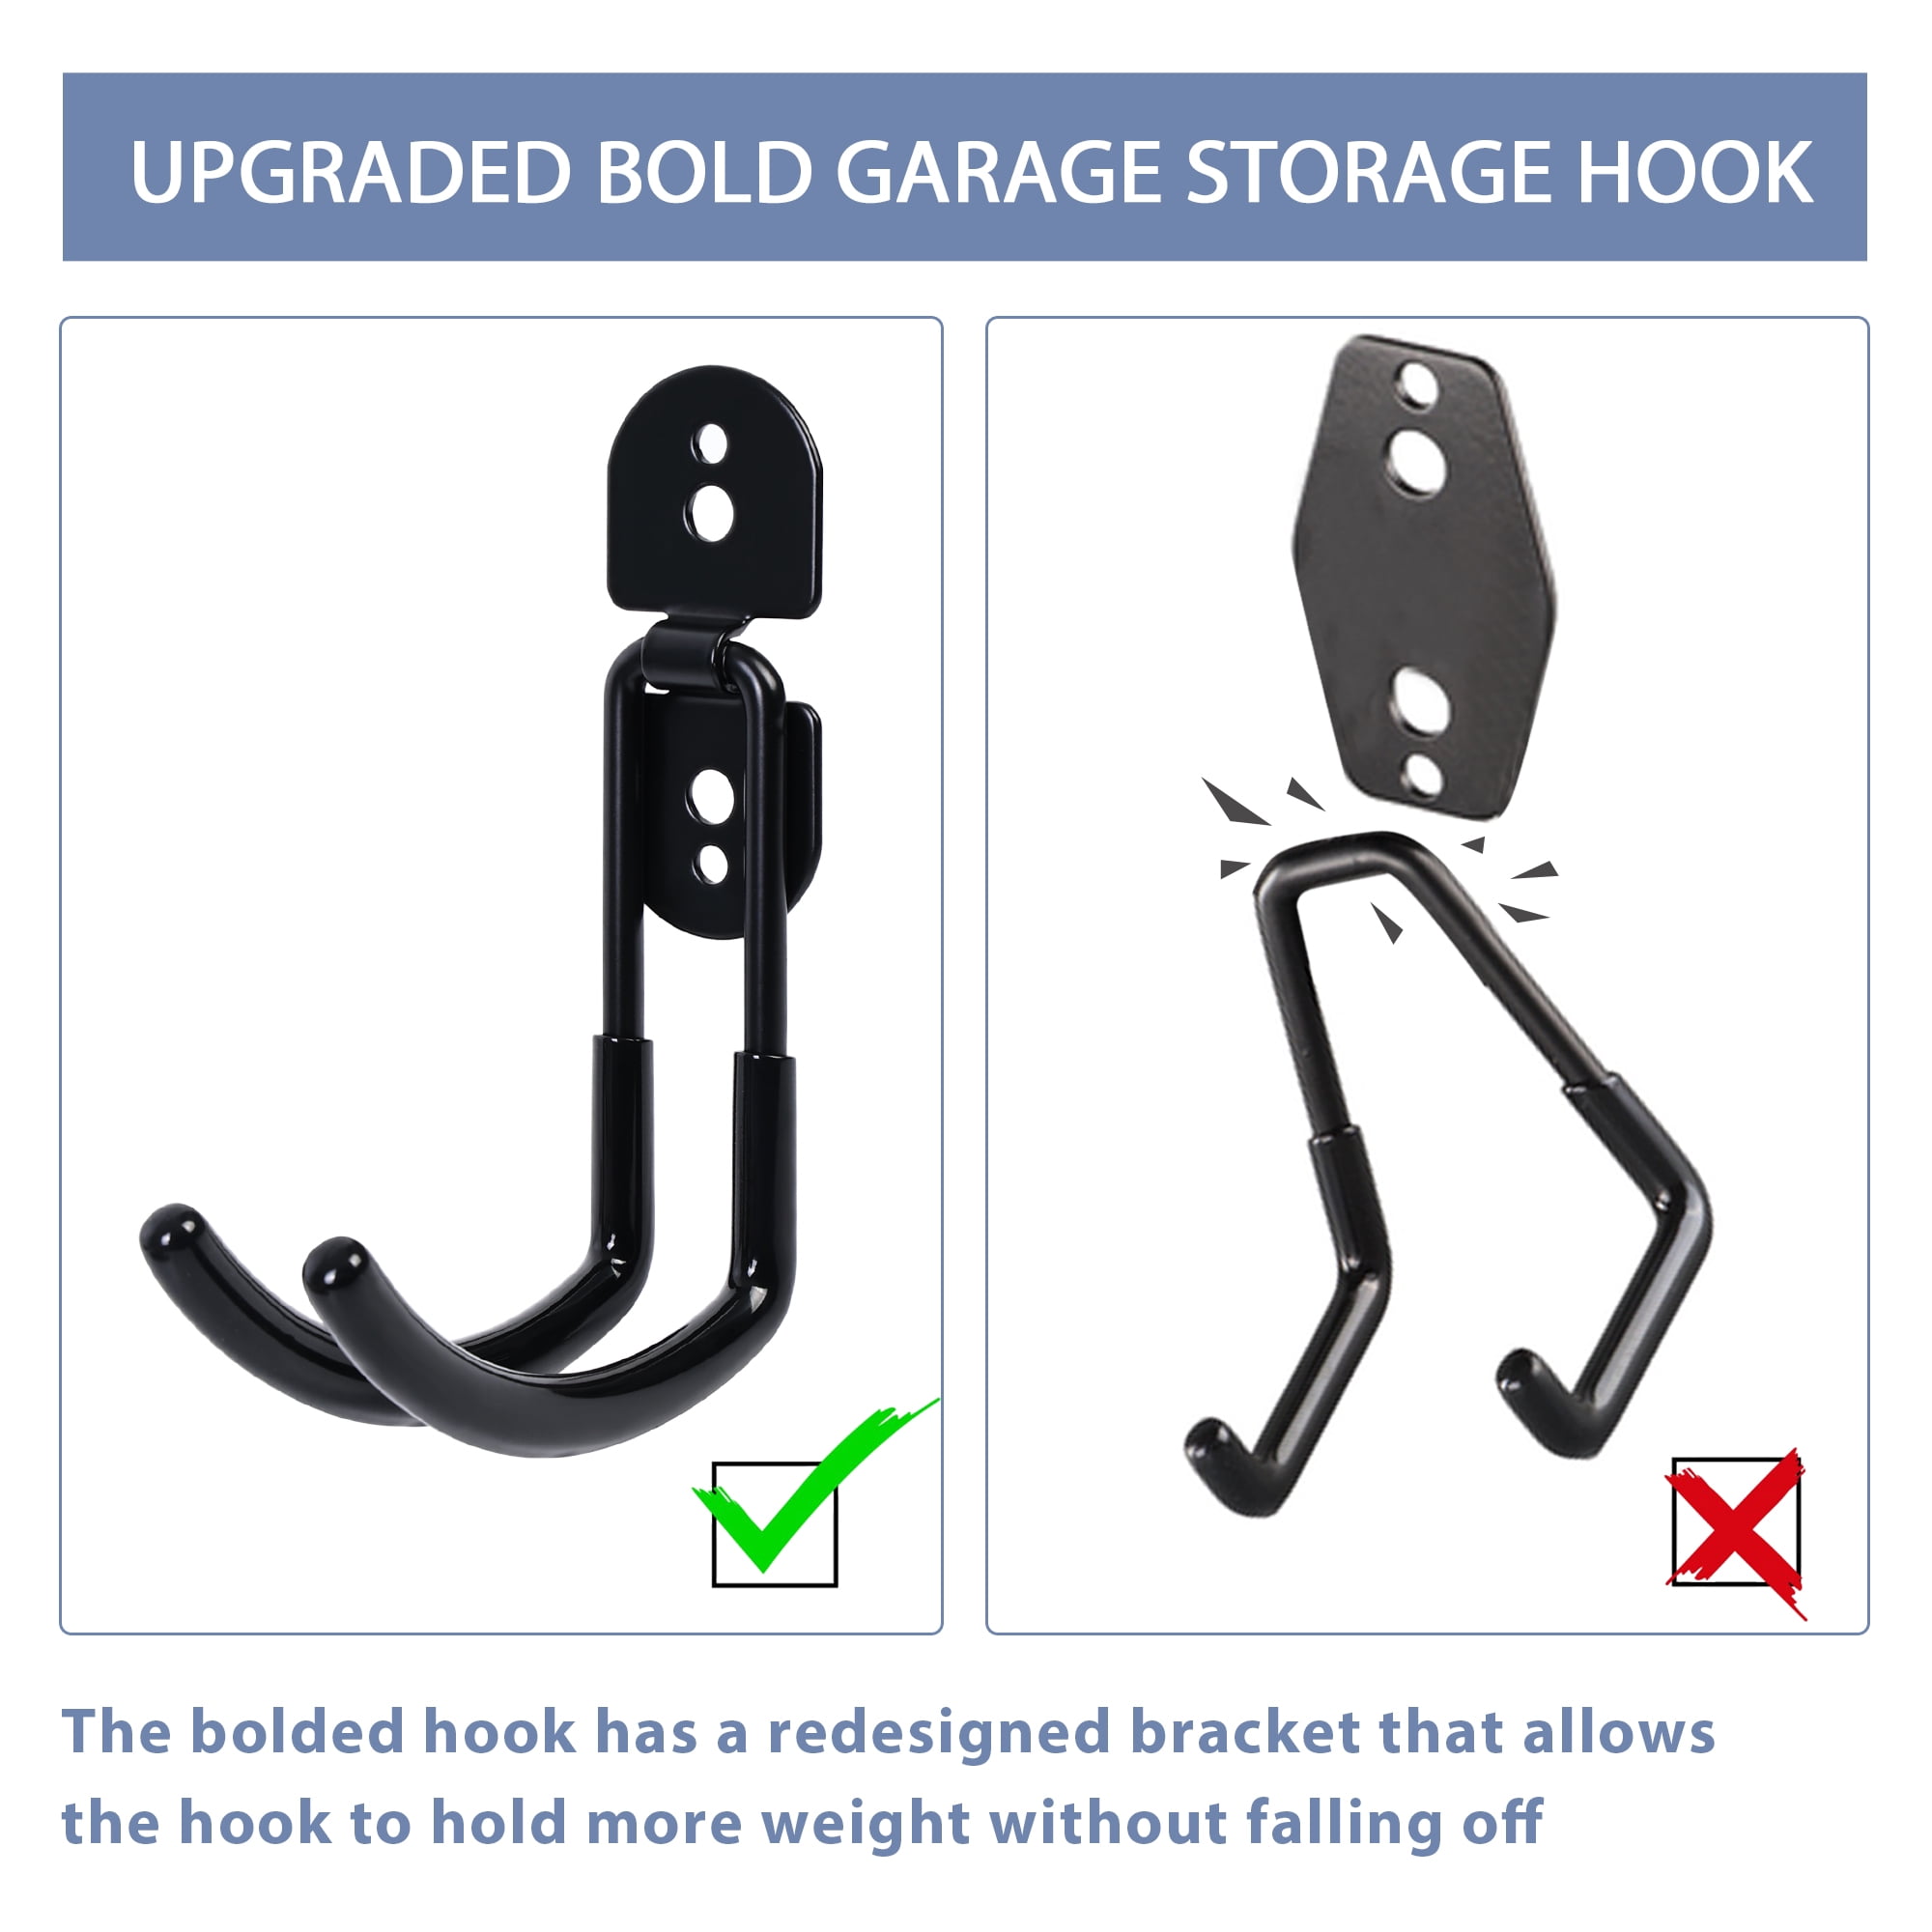 Home Master Hardware 12 Pack Garage Storage Hooks 4 inch J Utility Hangers Heavy Duty Garage Wall Hooks for Hanging Universal Wall Mounted Hangers H